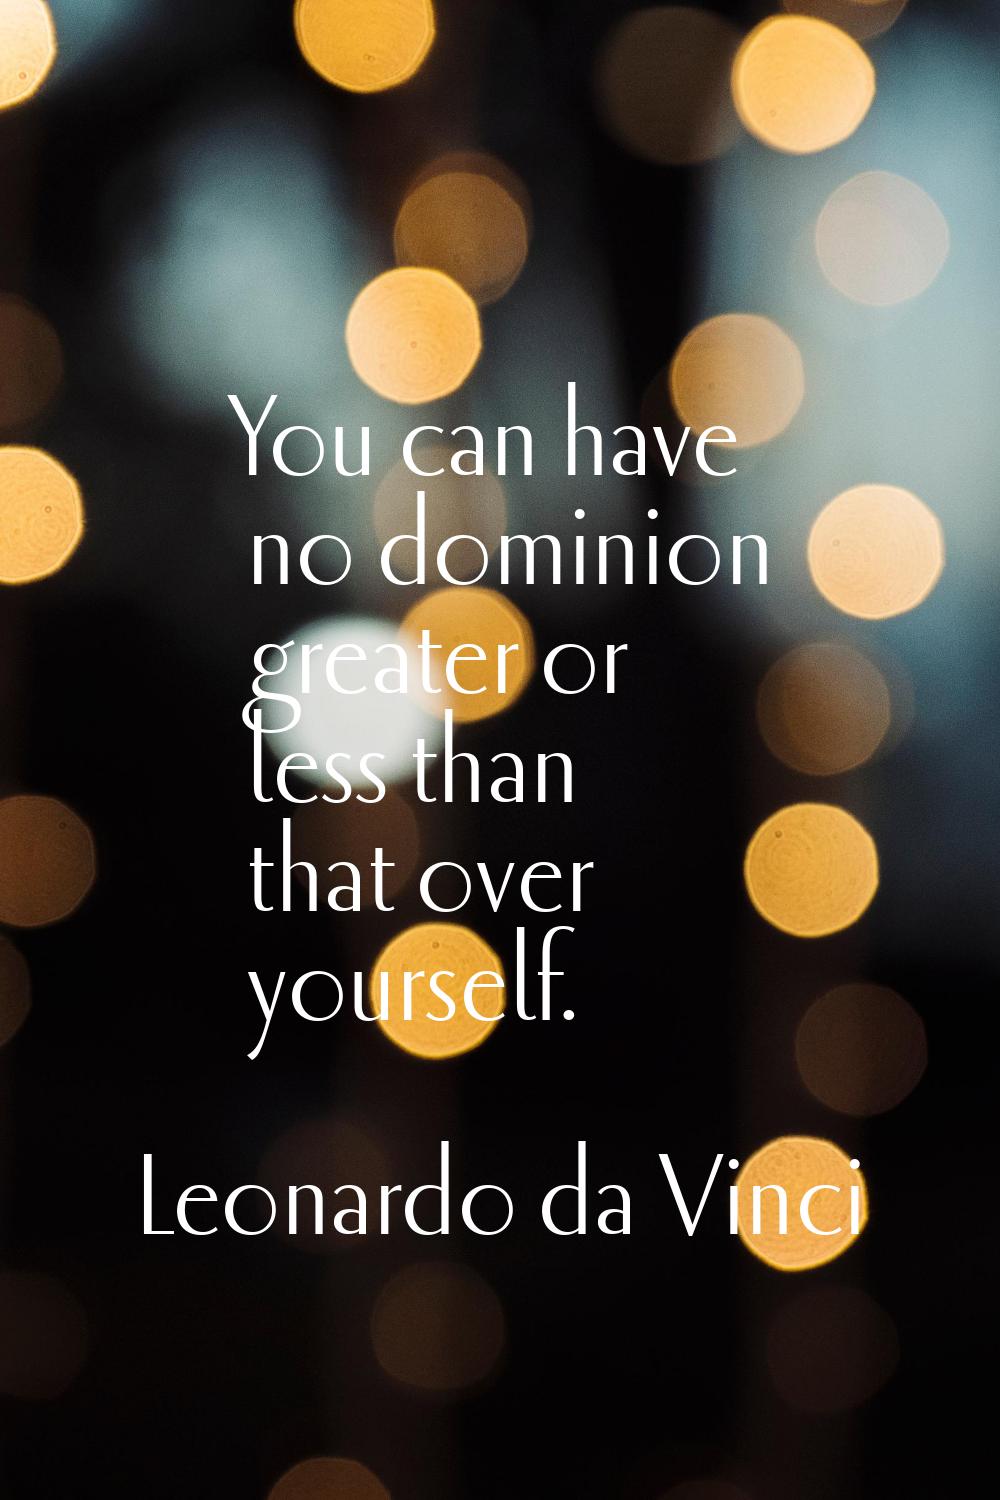 You can have no dominion greater or less than that over yourself.